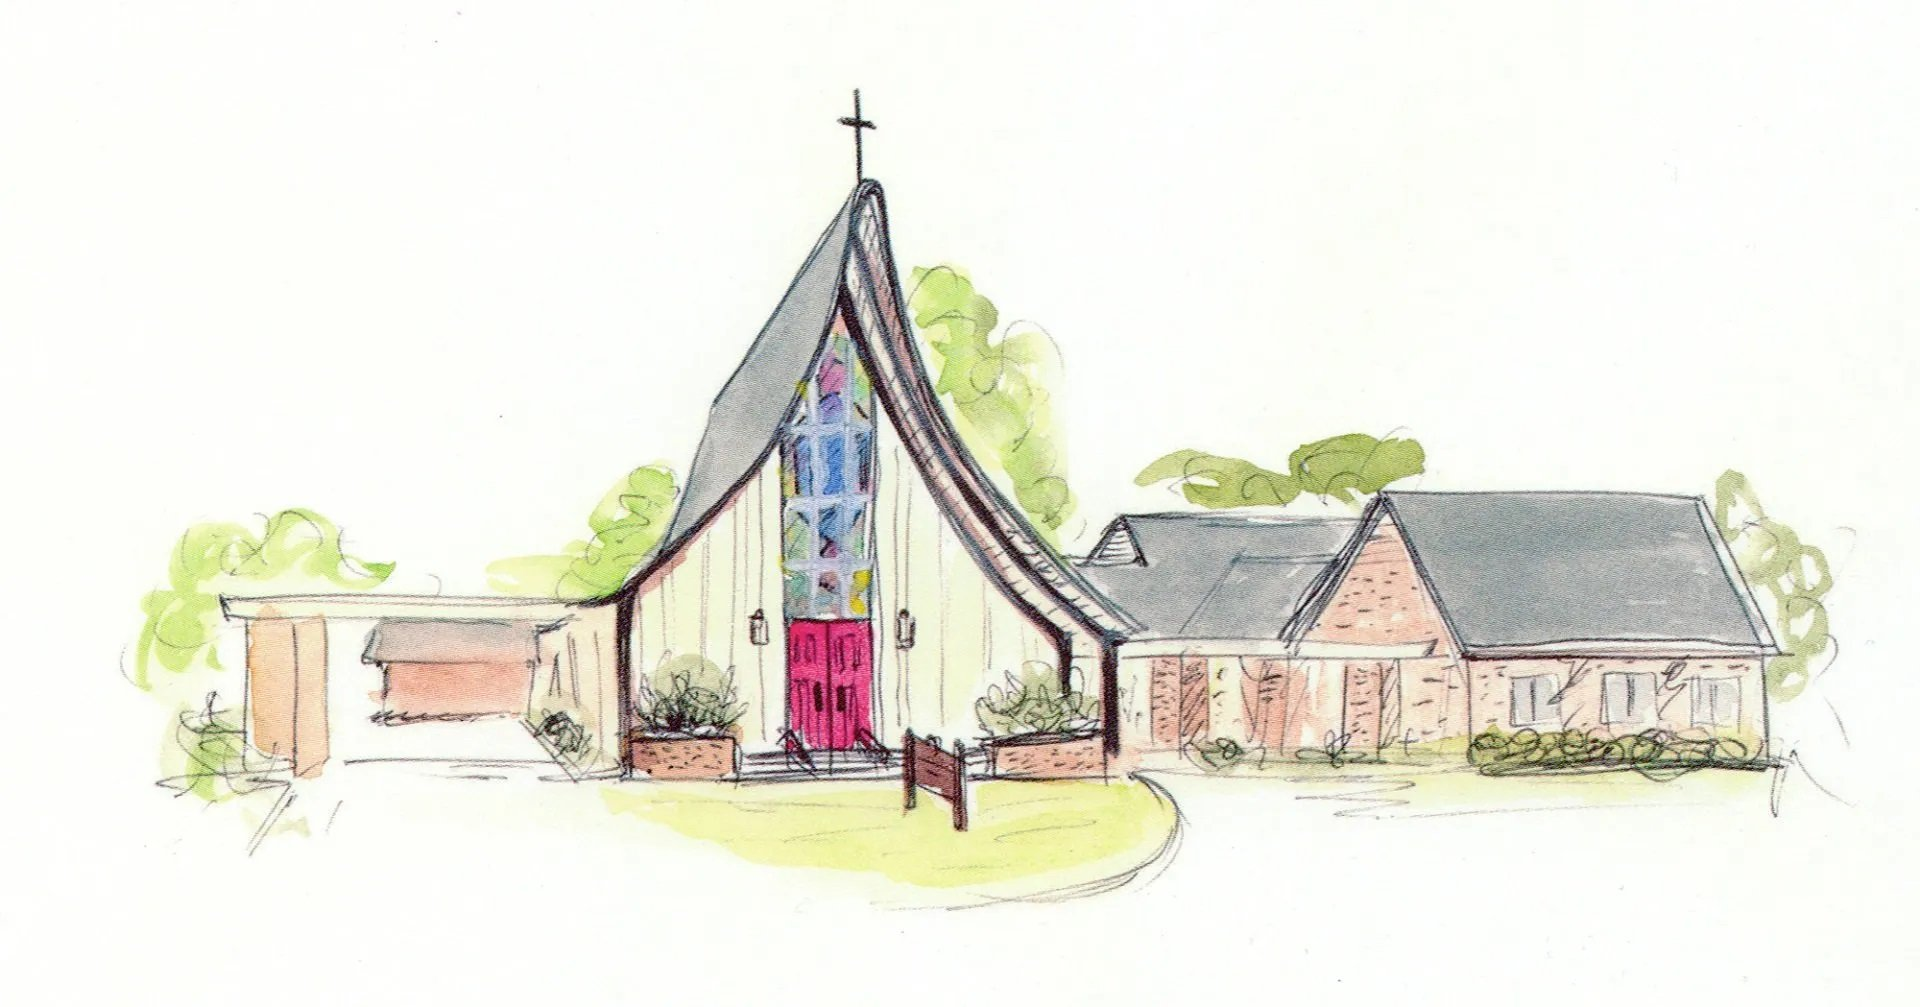 Pen and Ink drawing of the exterior of the Episcopal Church of the Redeemer in Ruston, Louisiana